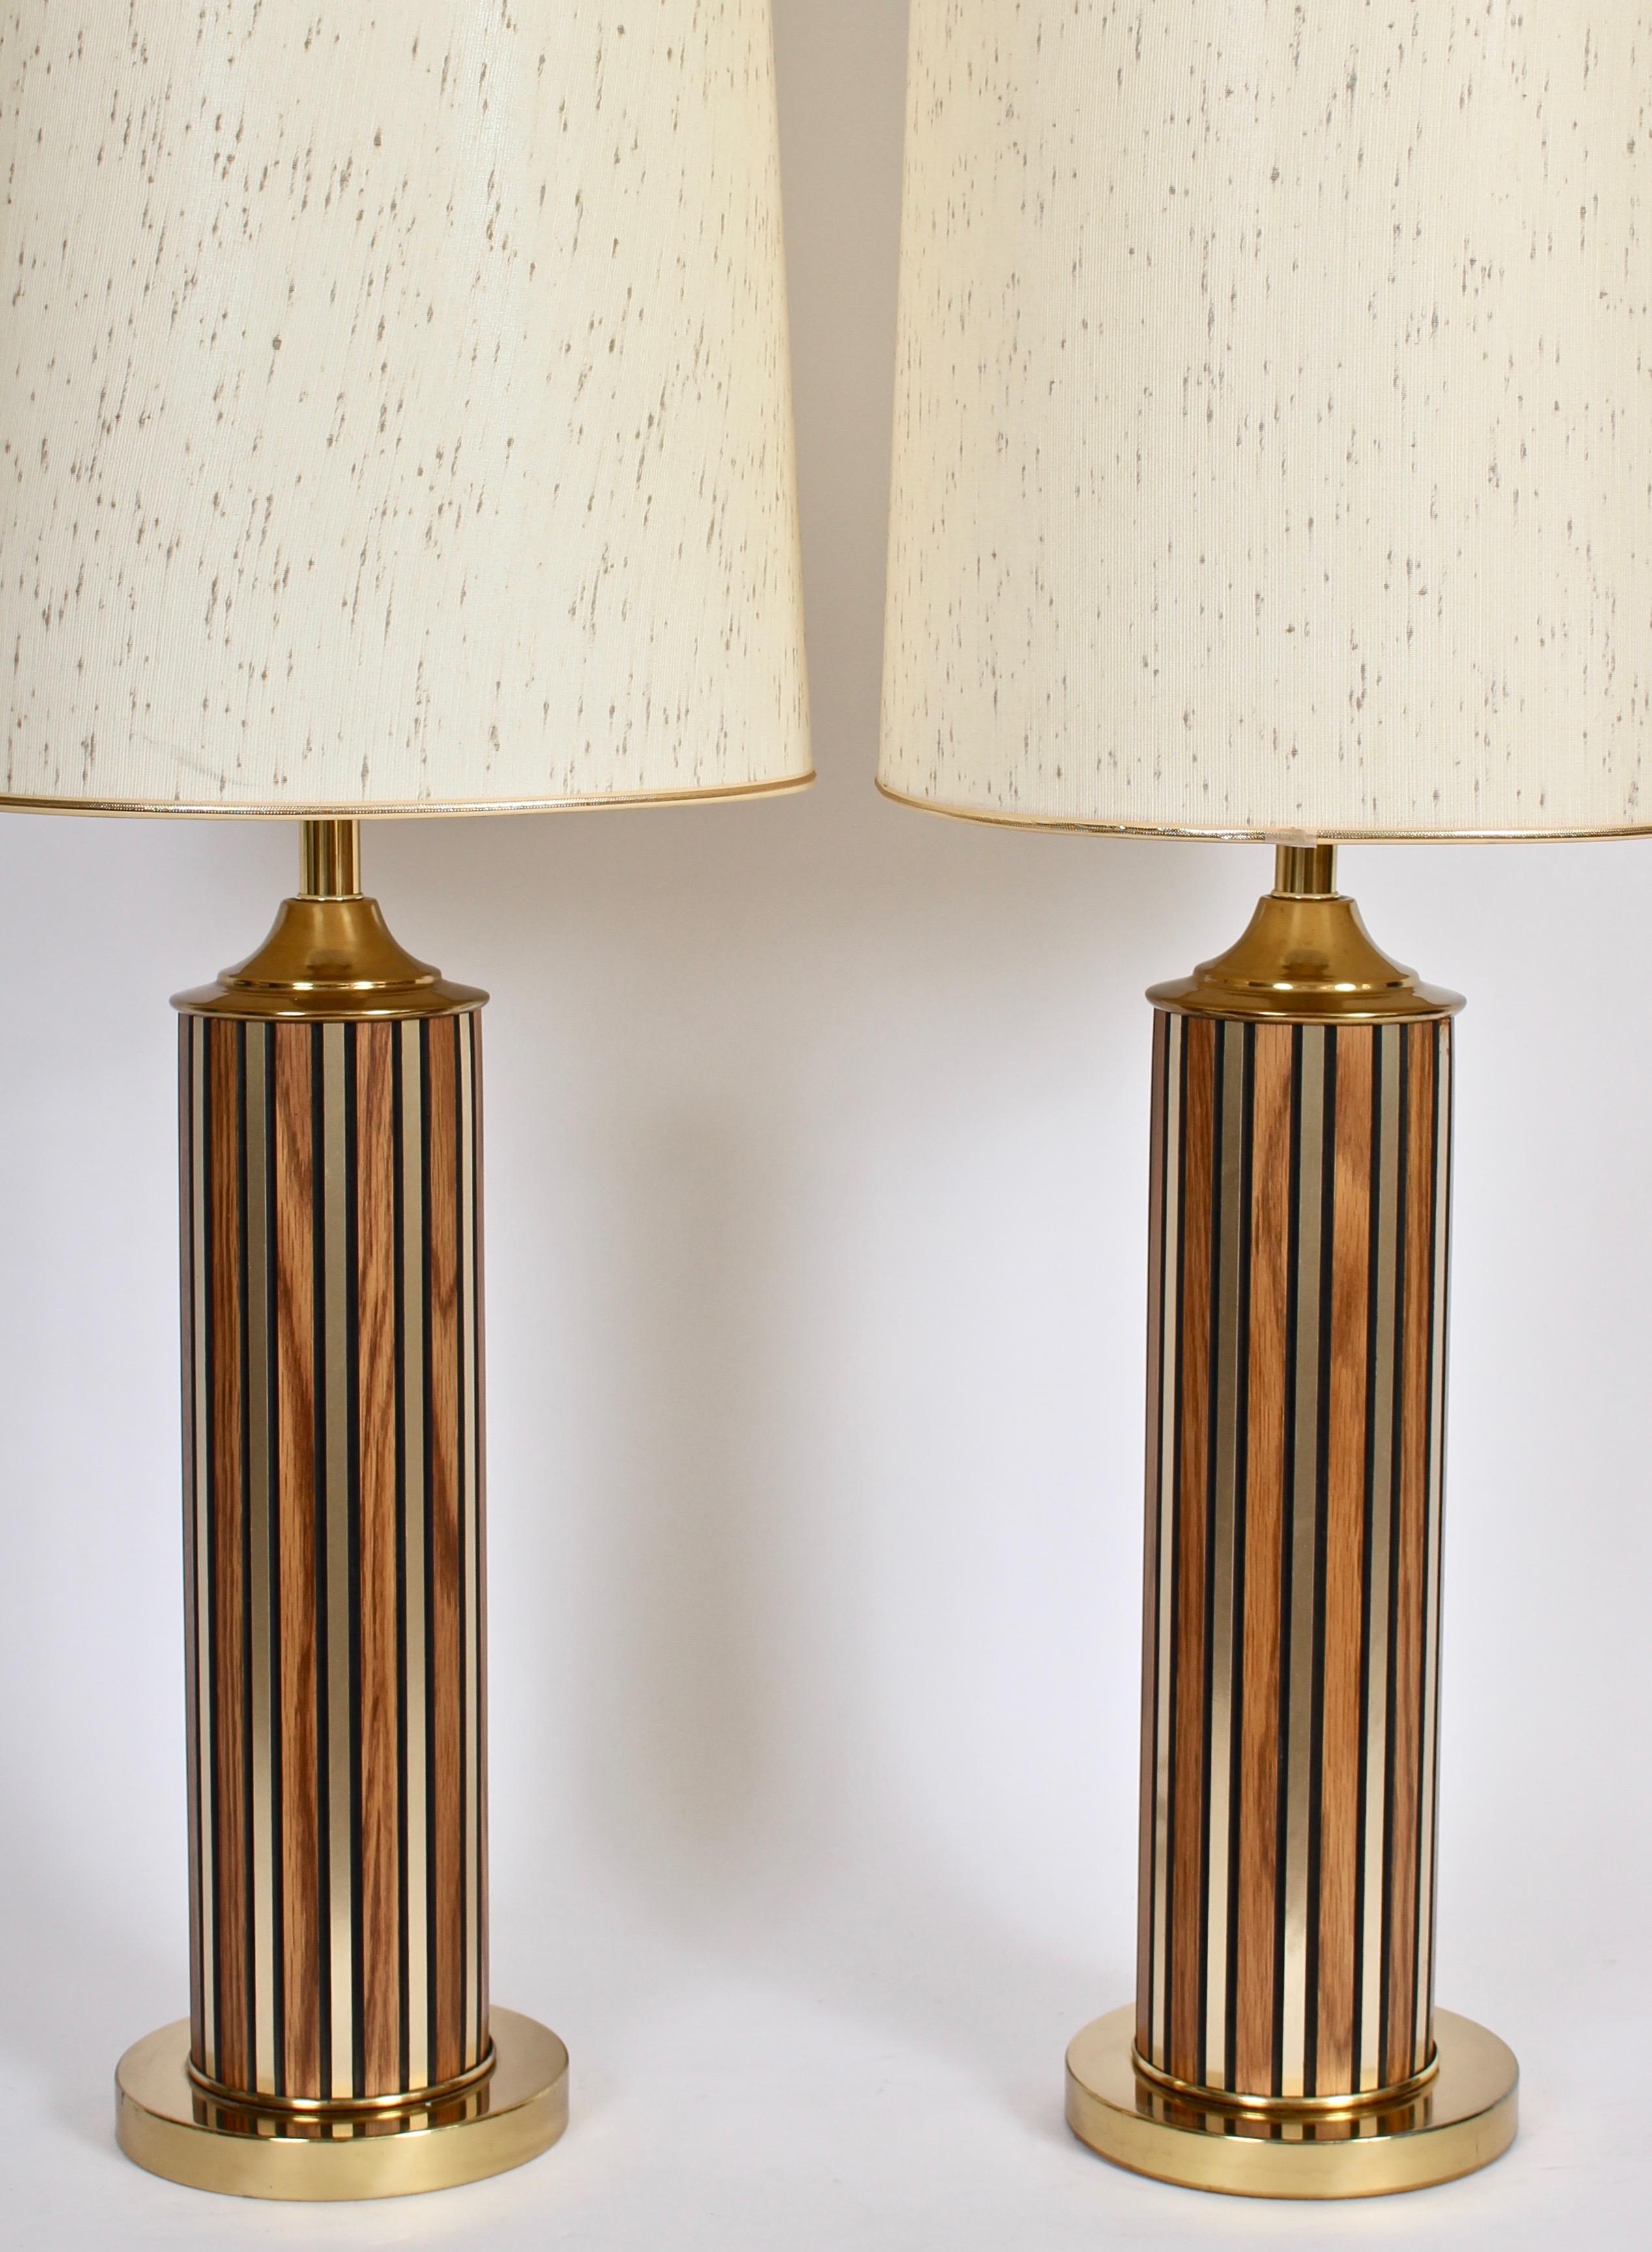 Modern Tall Pair of Alternating Brass and Walnut Column Table Lamps, circa 1970